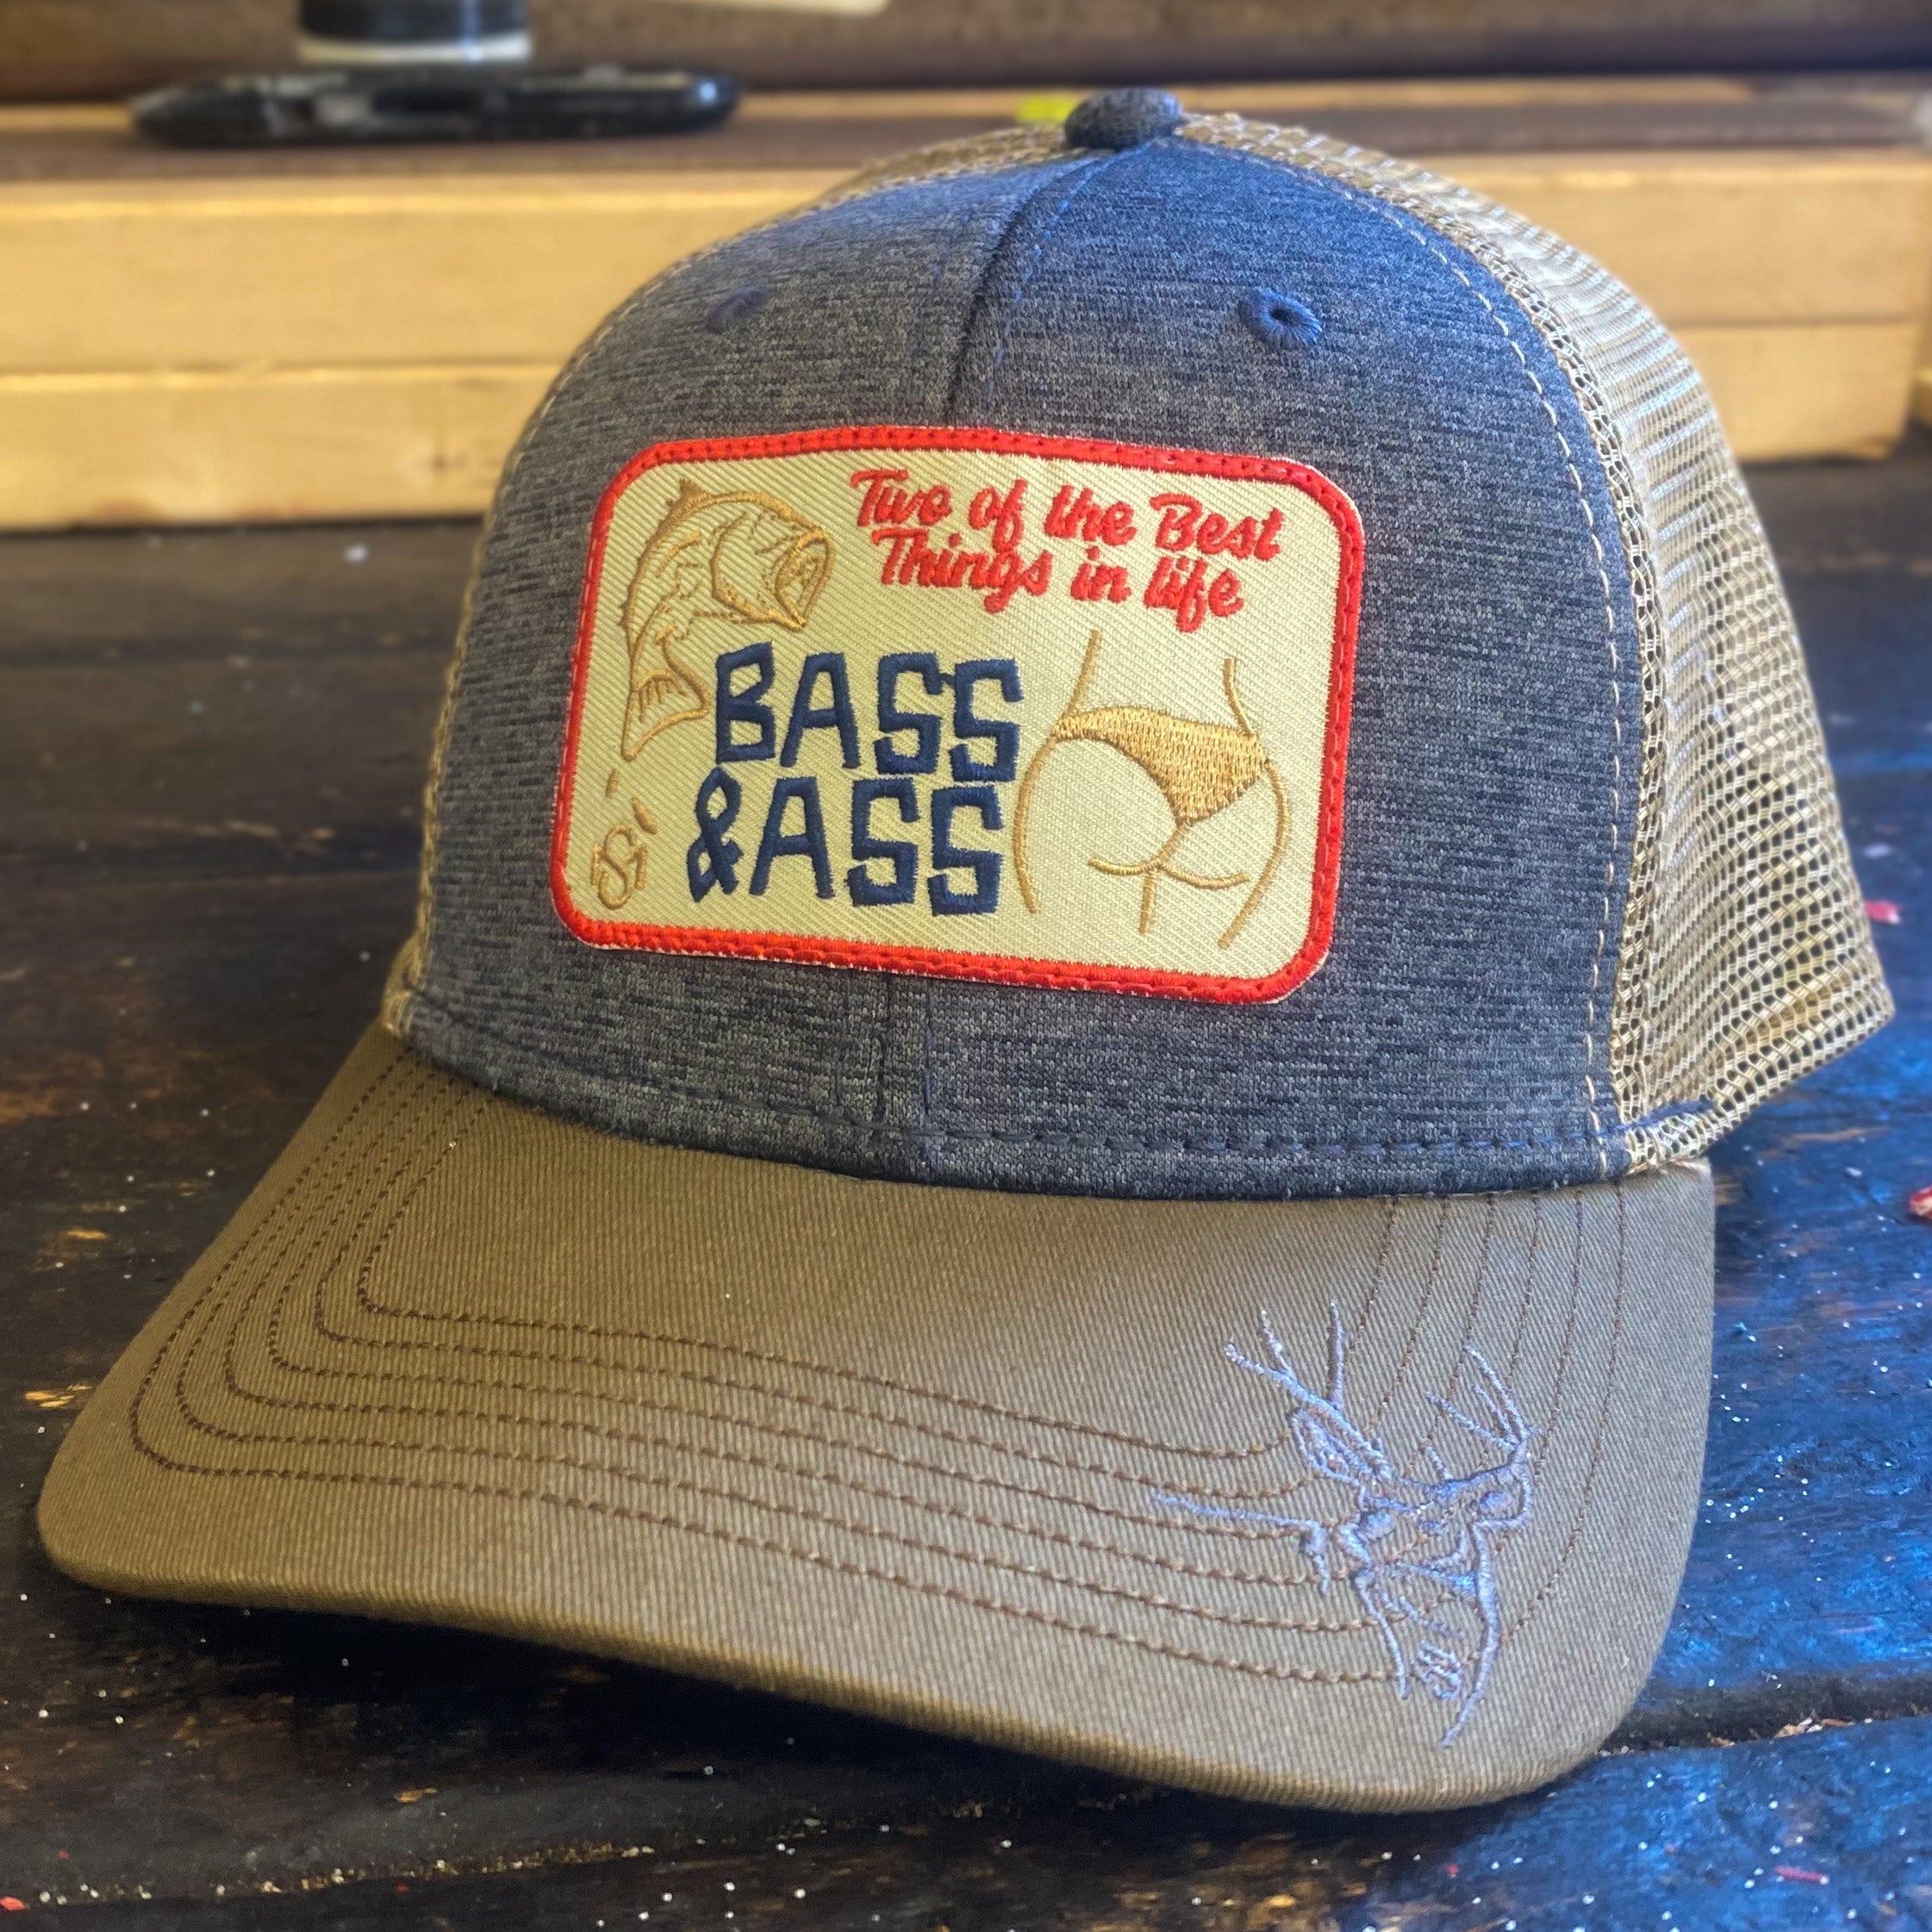 Bass and Ass Hat – Sea Of Mud Apparel Co.